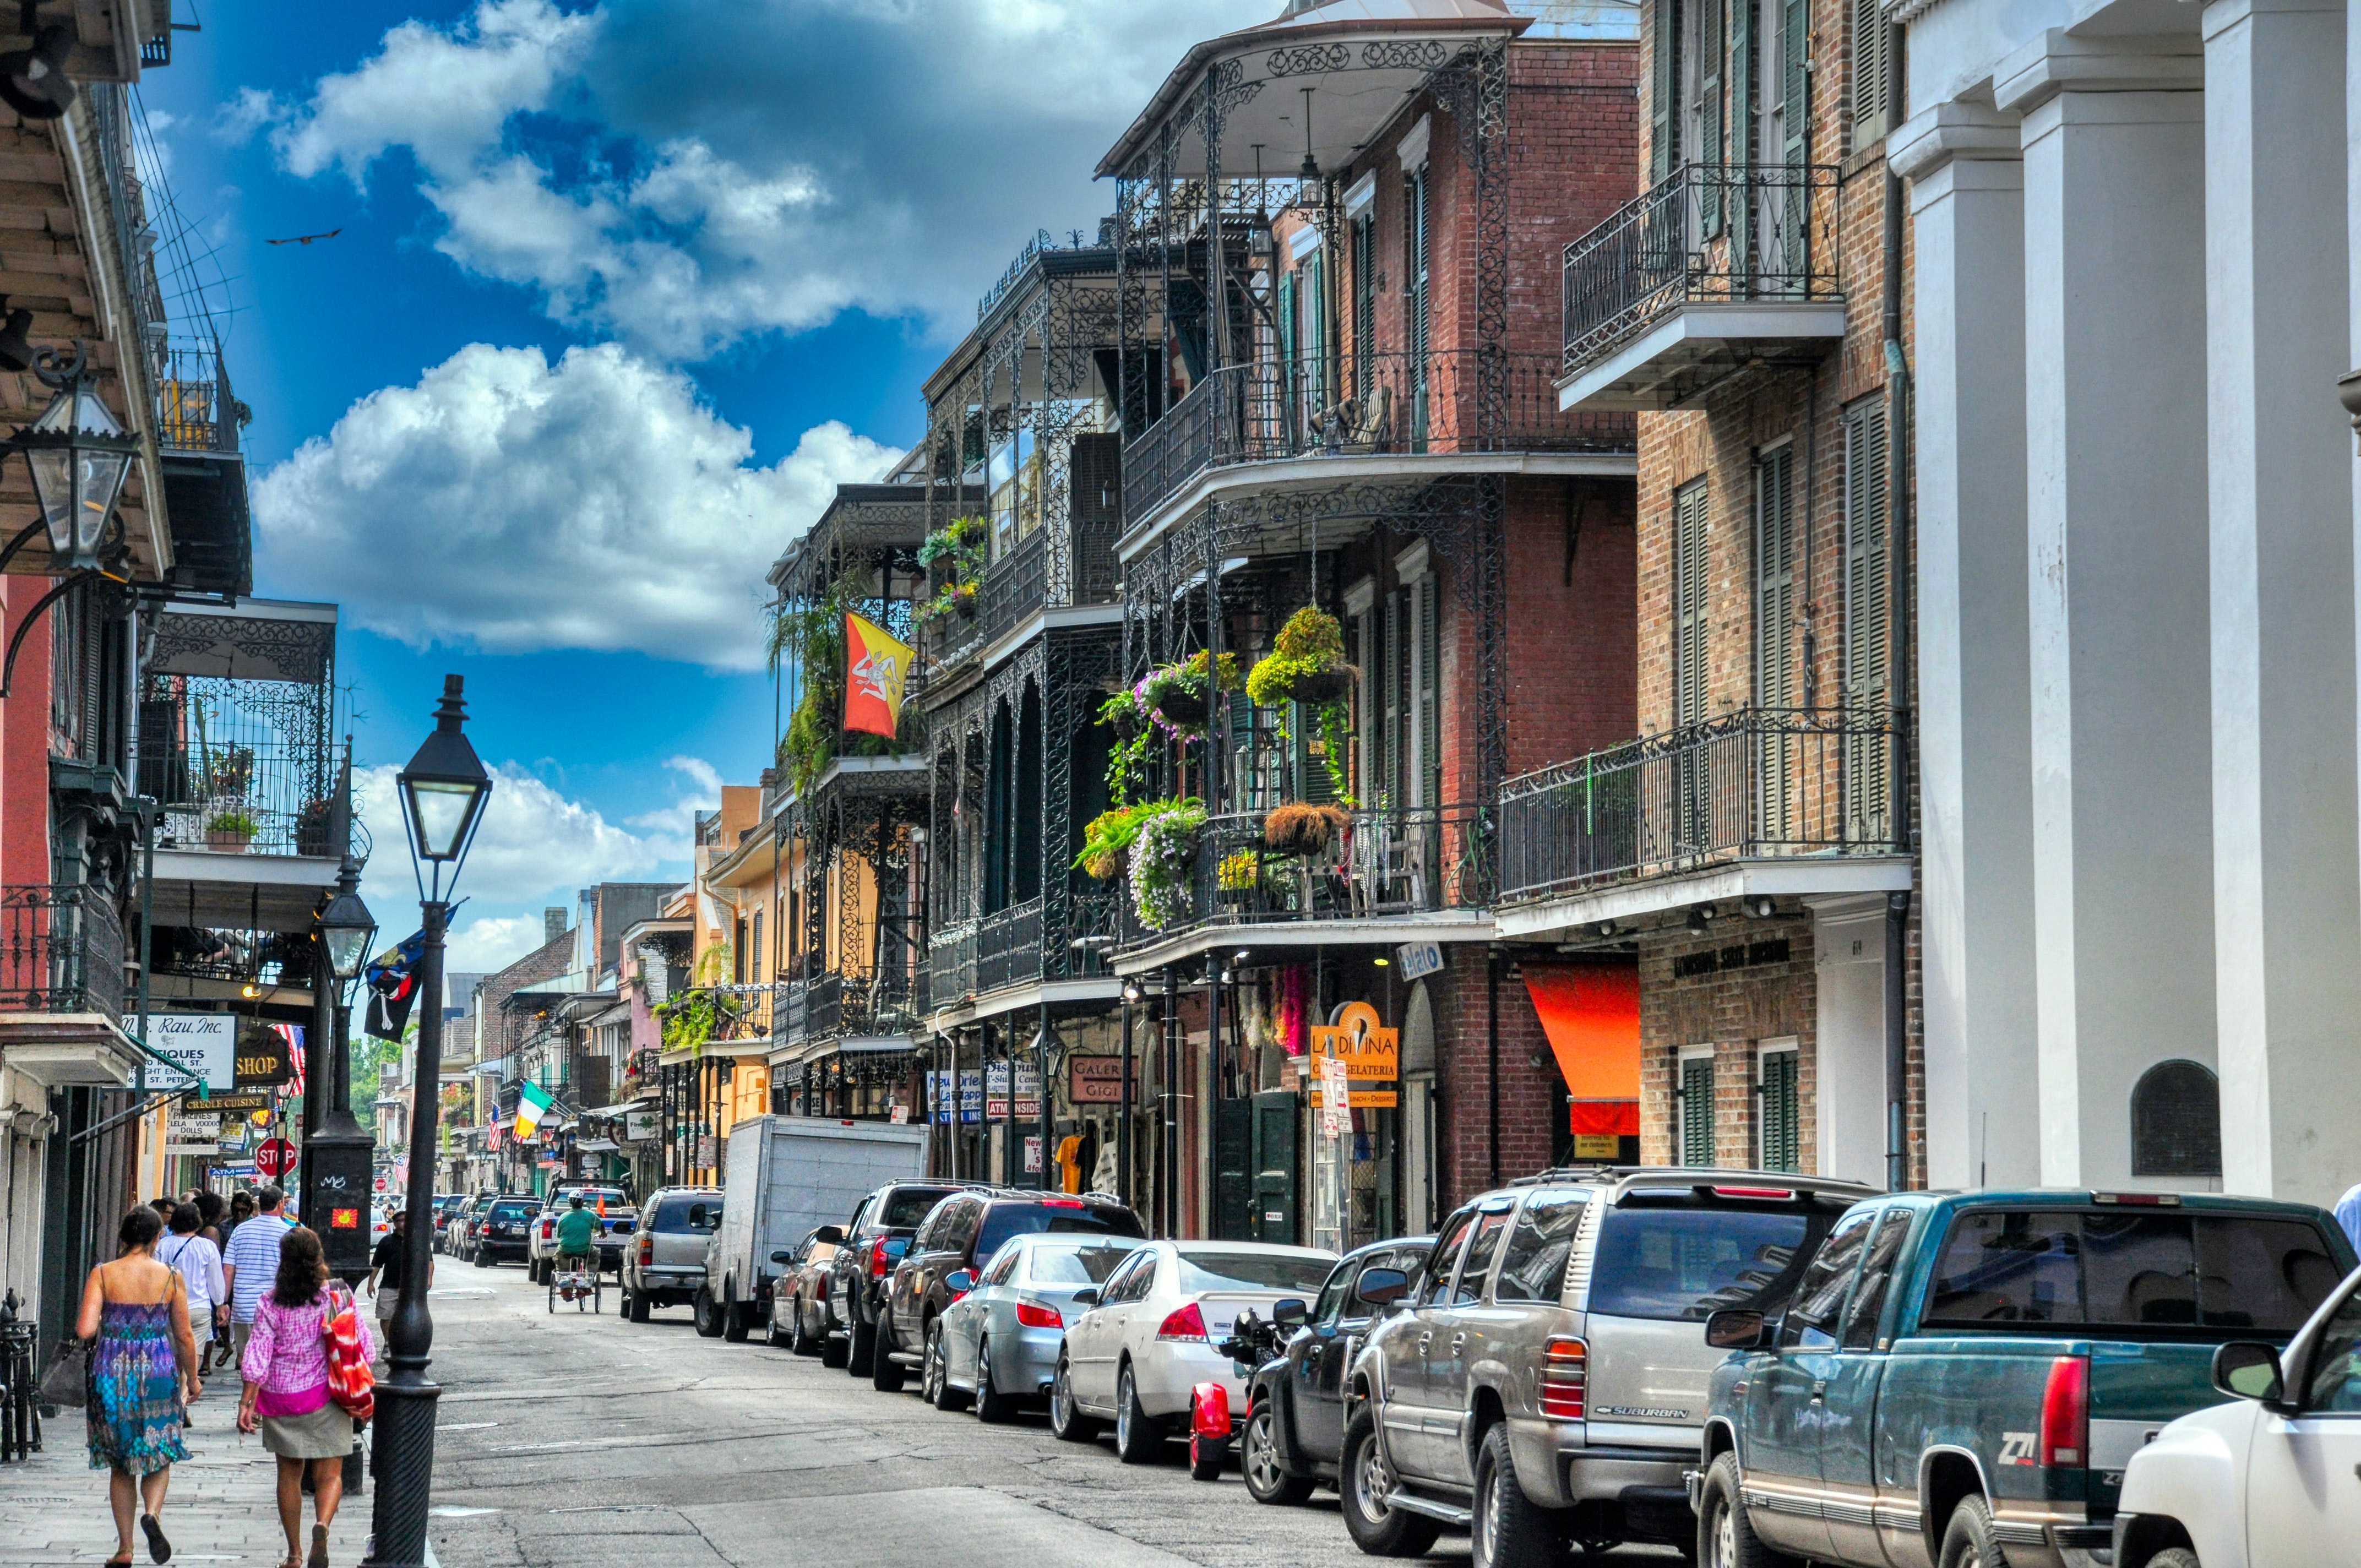 A street from New Orleans’ French Quarter. Colonial-style houses with balconies line the street. Cars are parked on the right side of the street while some people walk on the left side.